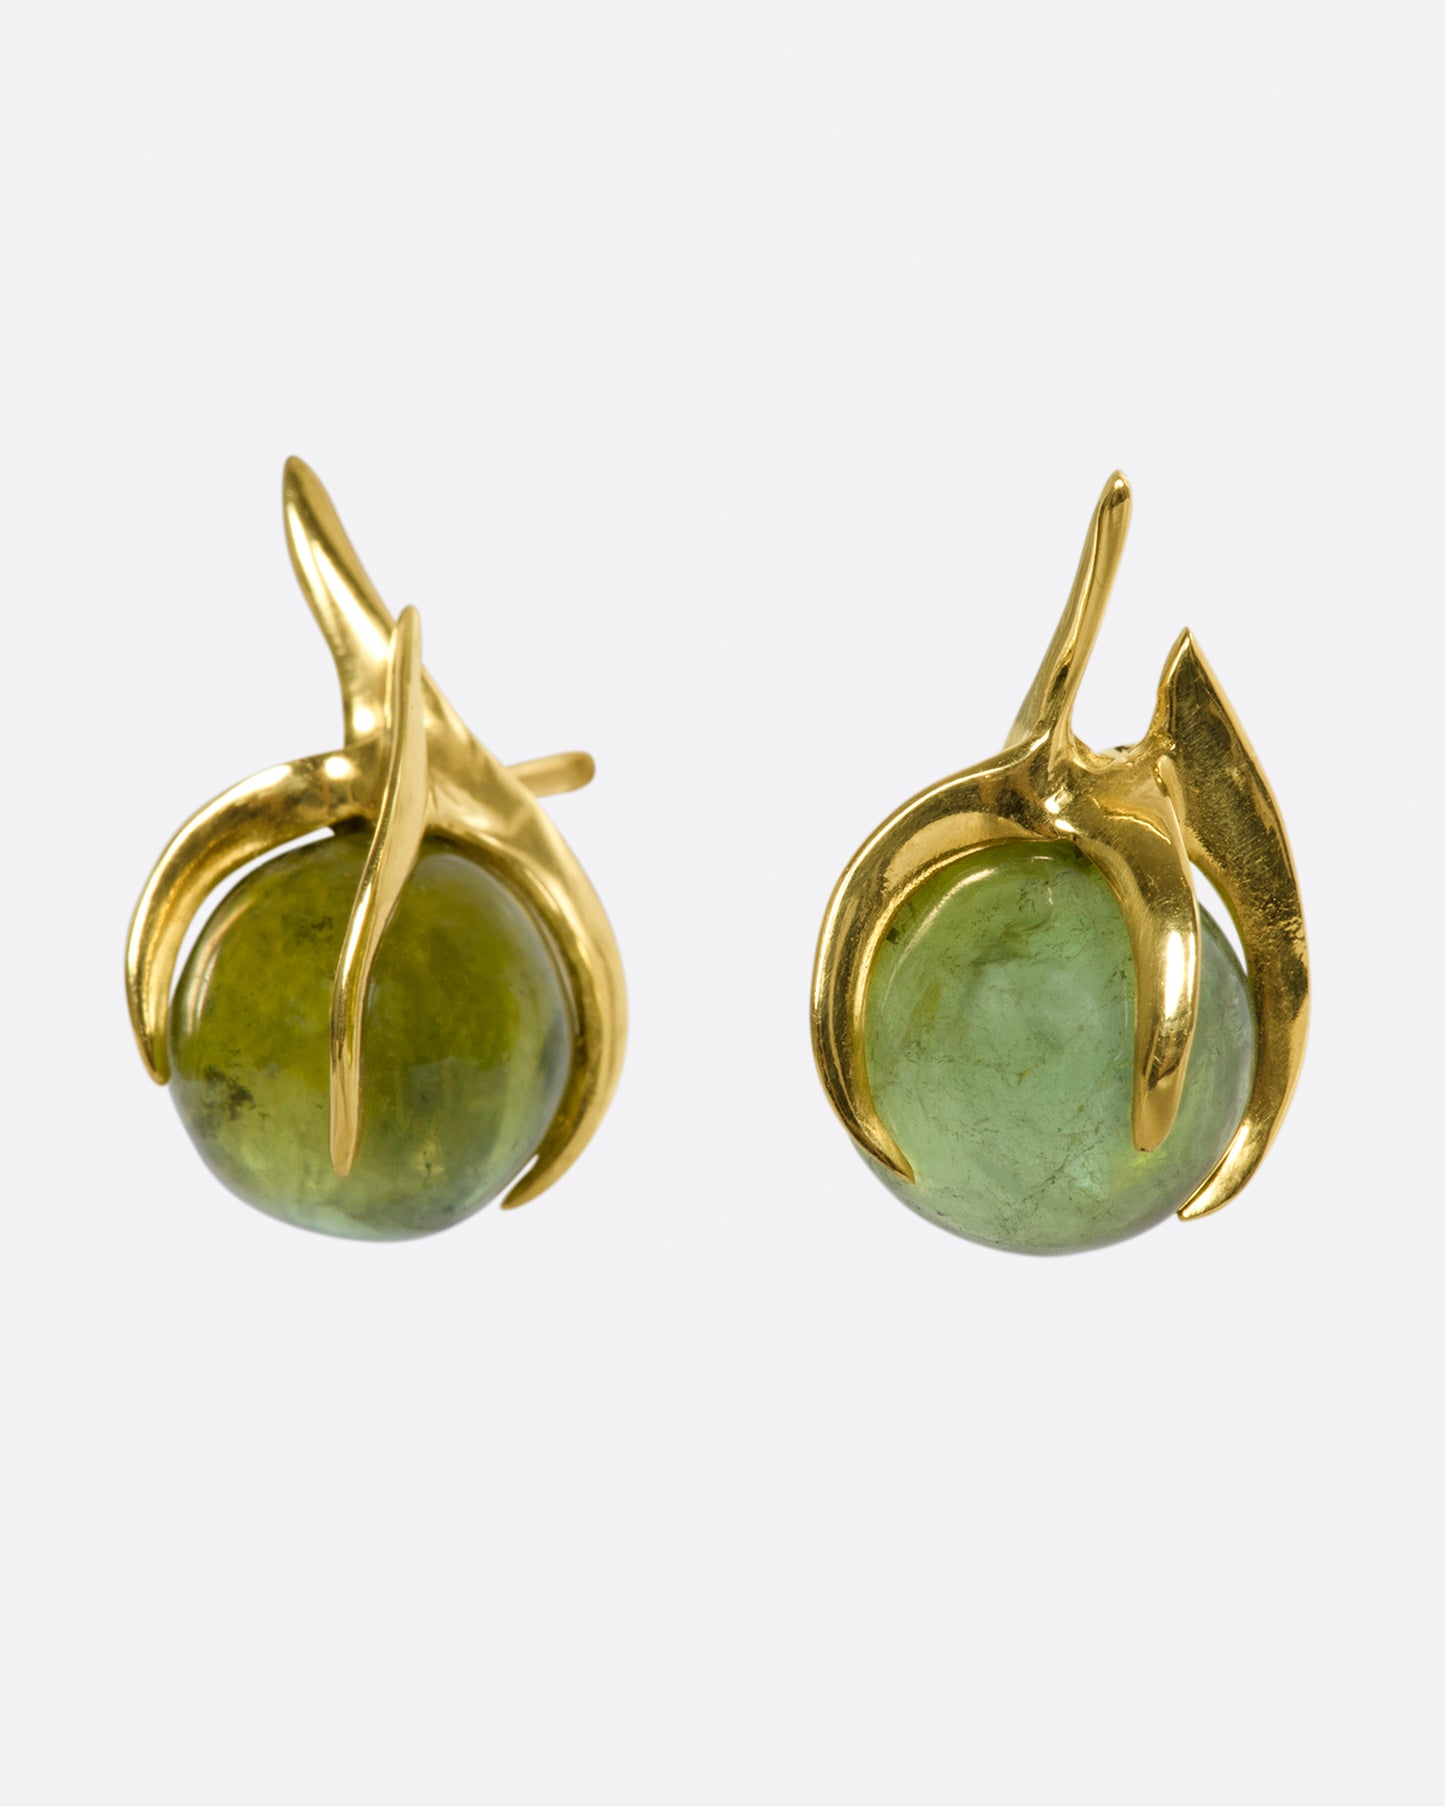 A pair of yellow gold stud earrings with green tourmaline spheres set in flame-like settings.